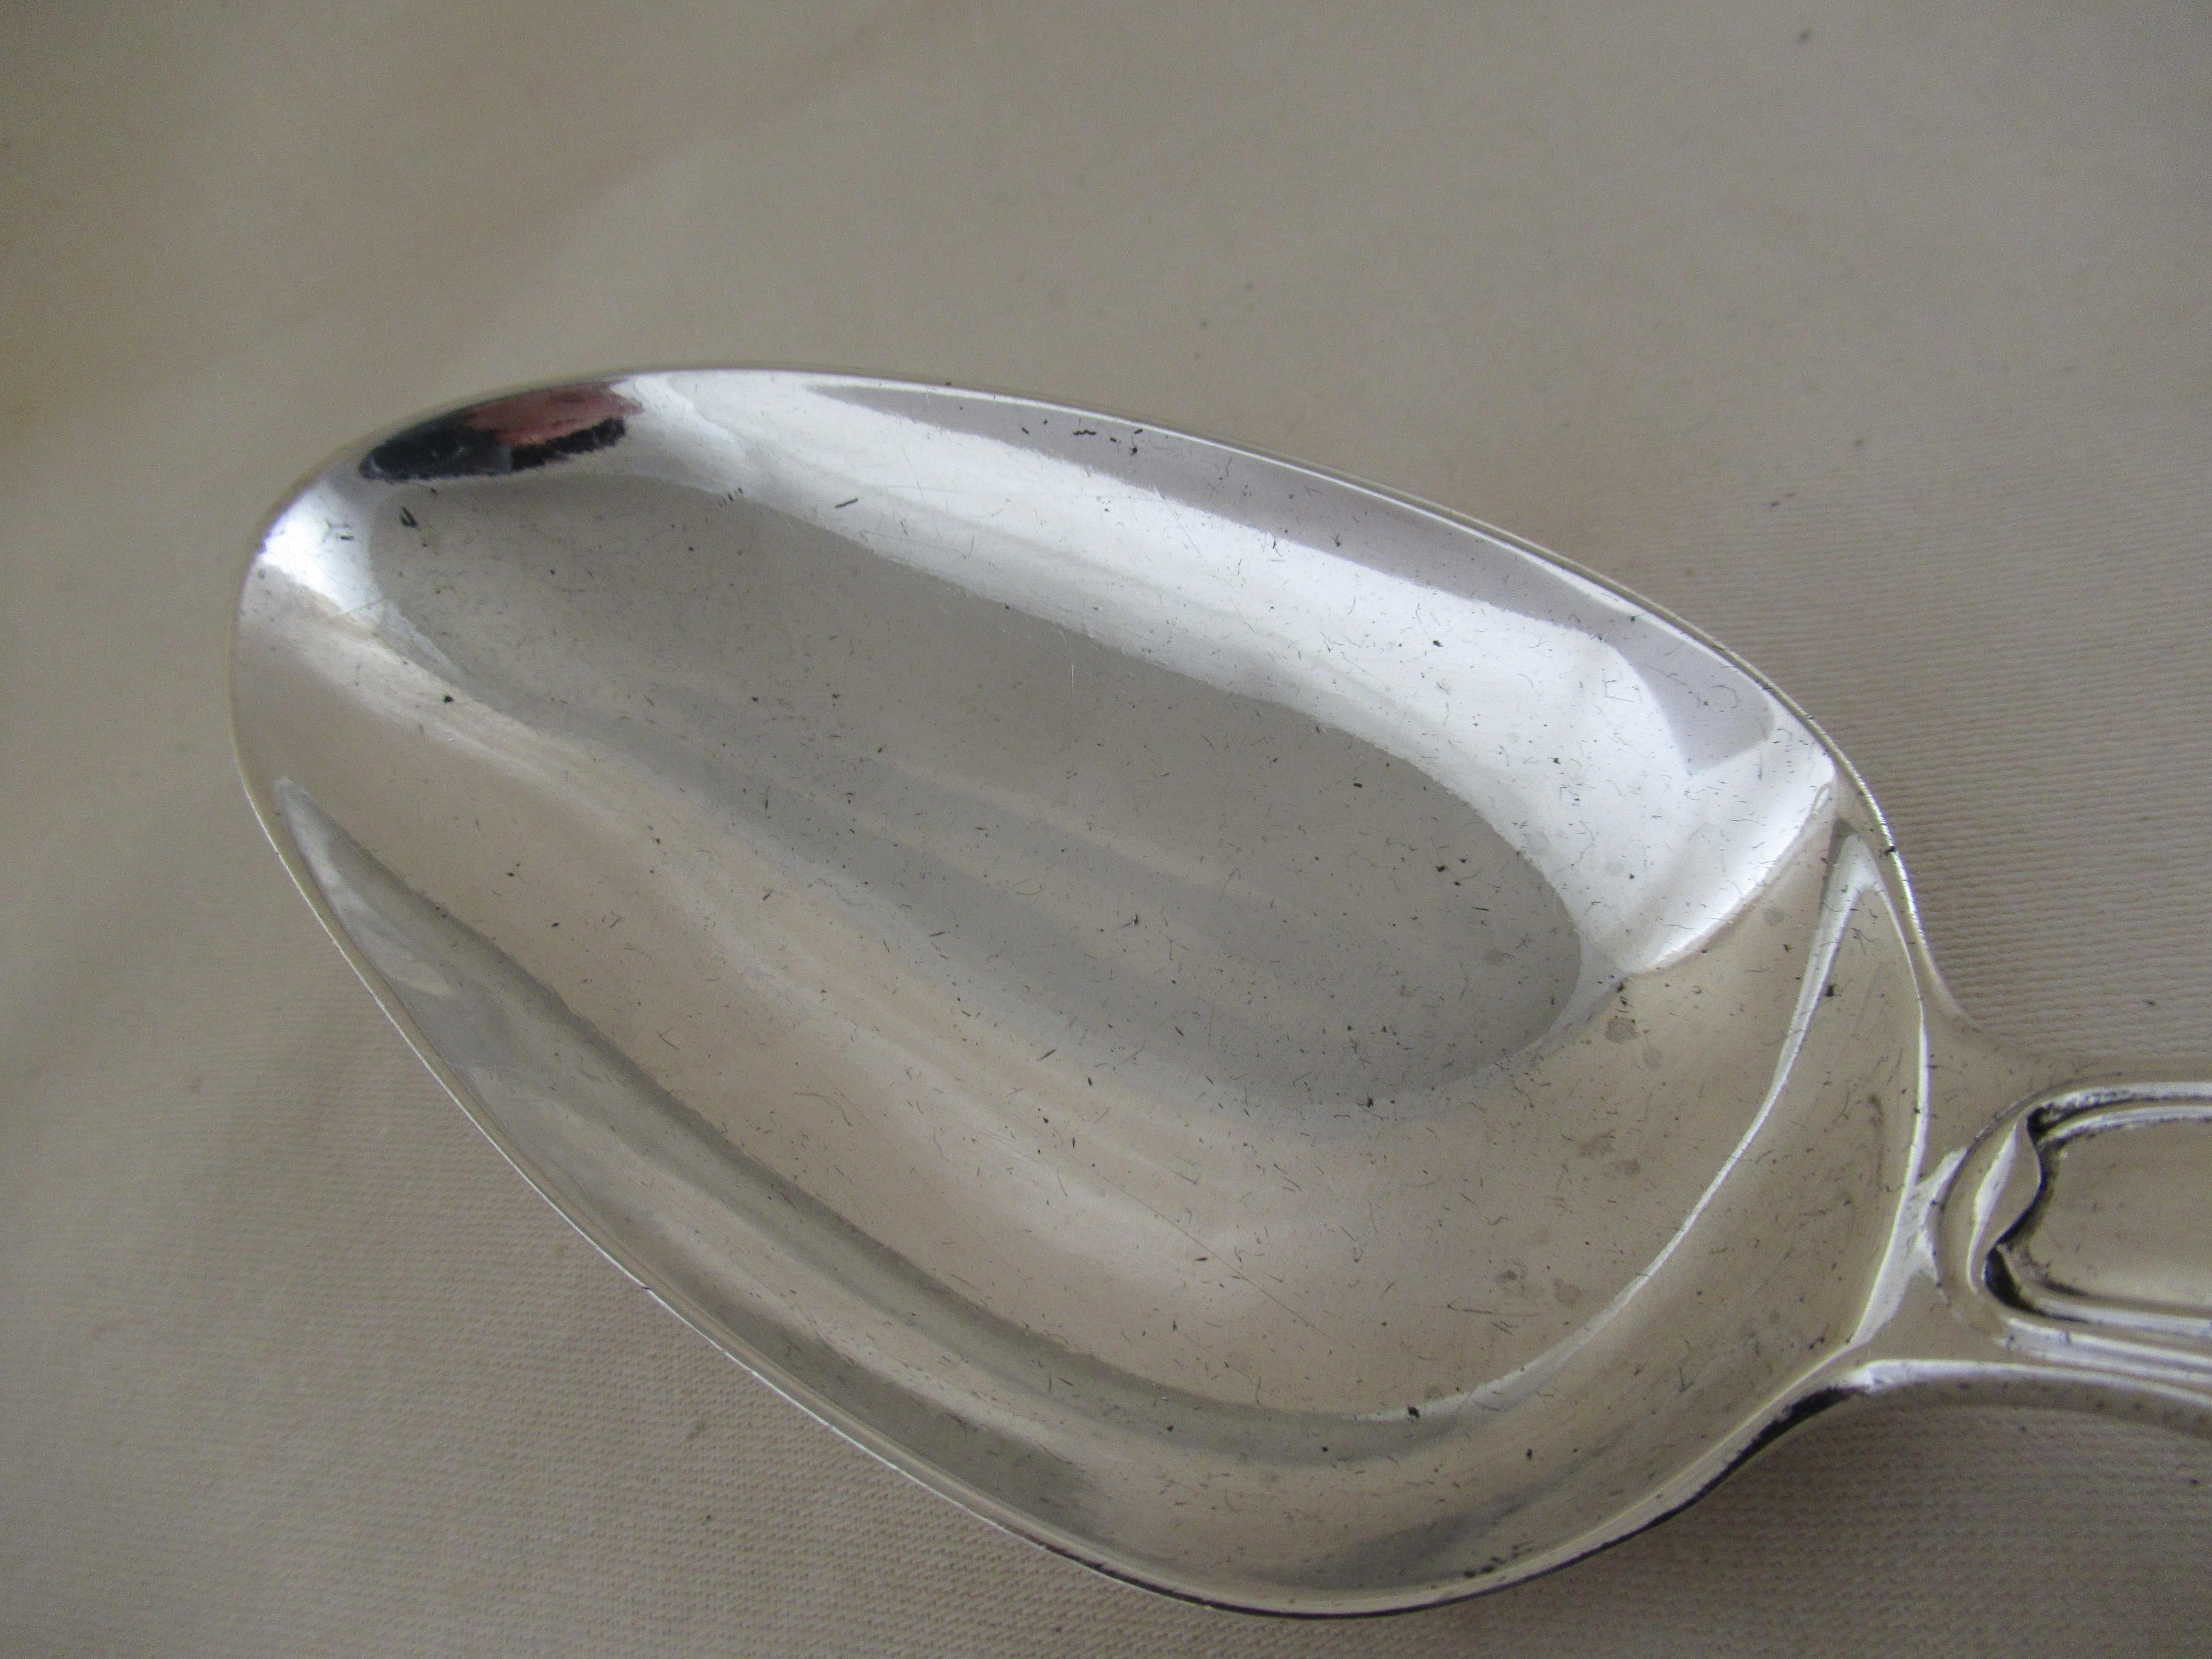 Sterling Silver fiddle & thread pattern - large serving spoon,
 otherwise called a Gravy Spoon 

A full set of English hallmarks, applied by the London Assay Office:-
 Queen`s Head - Duty mark shows that duty has been paid to the Crown
 L -